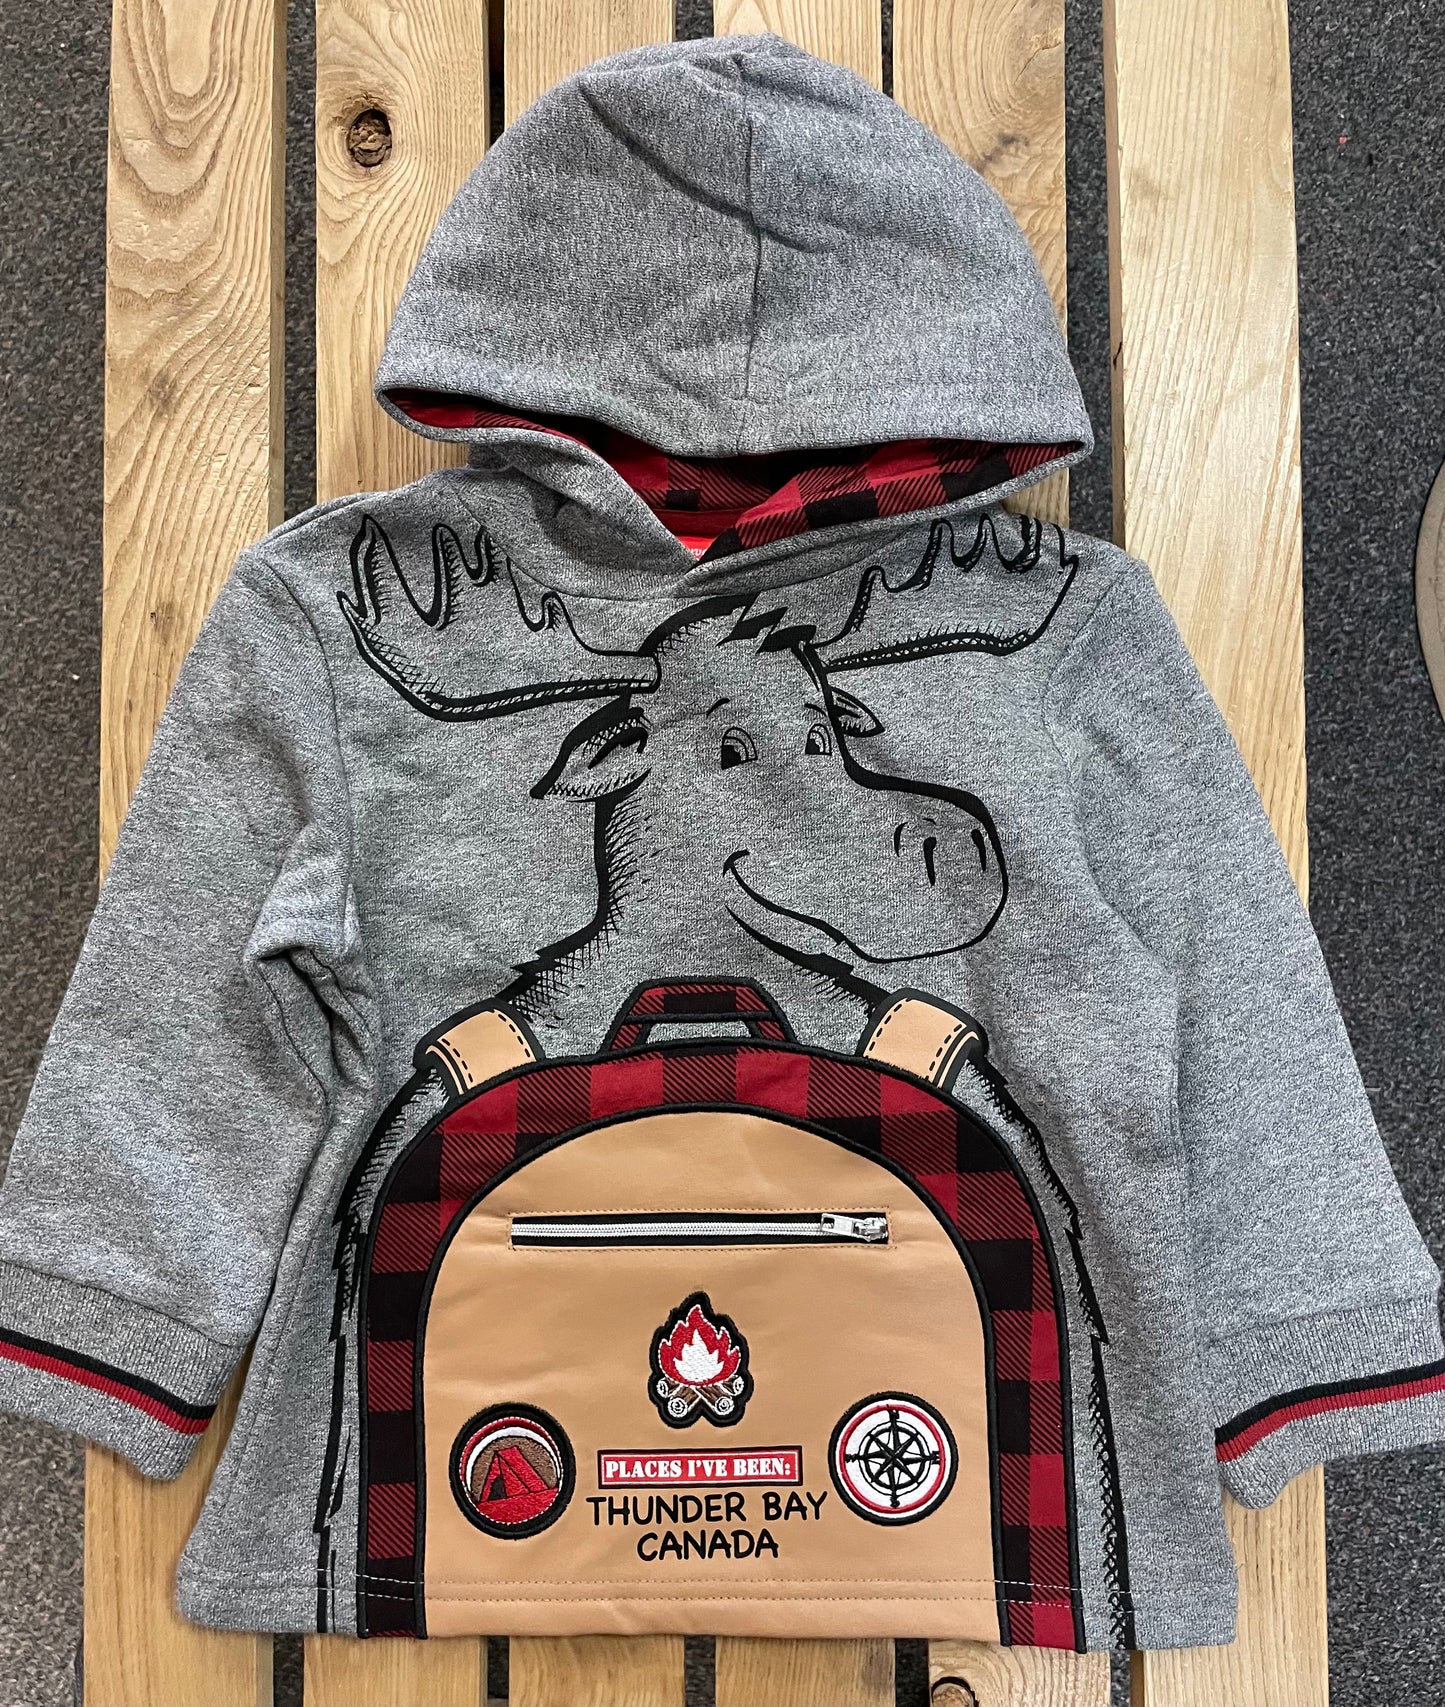 Souvenir Clothing - Kid's Moose Backpack Hoody - Places I've Been - Thunder Bay, Canada